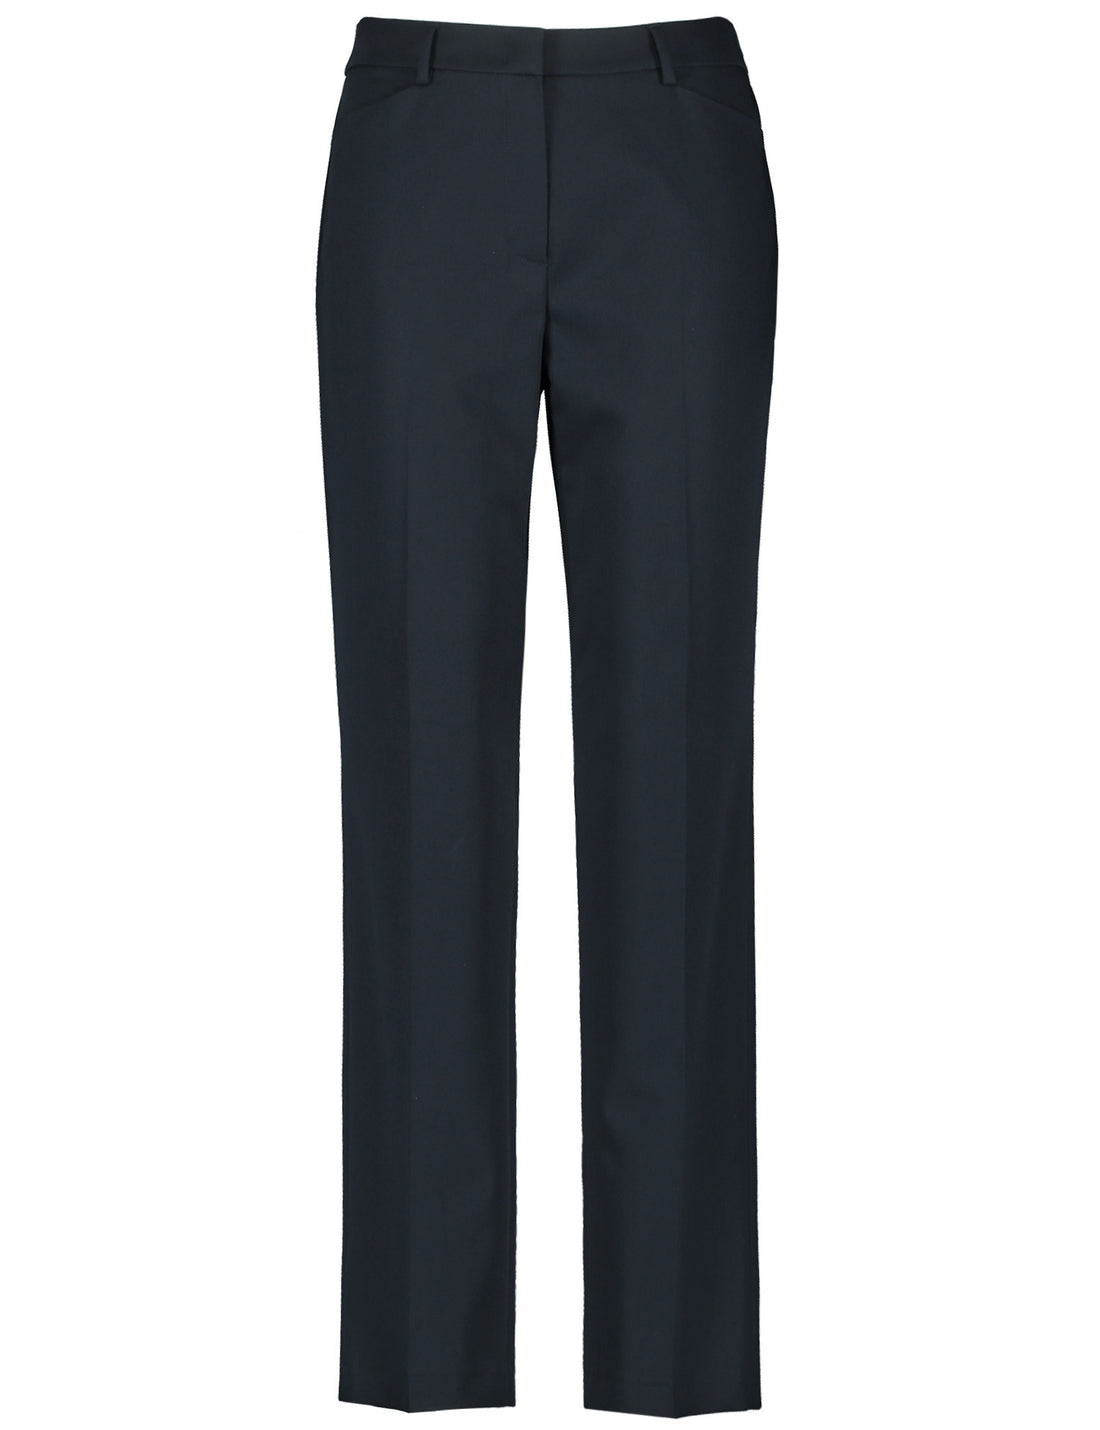 Straight Cut Trousers